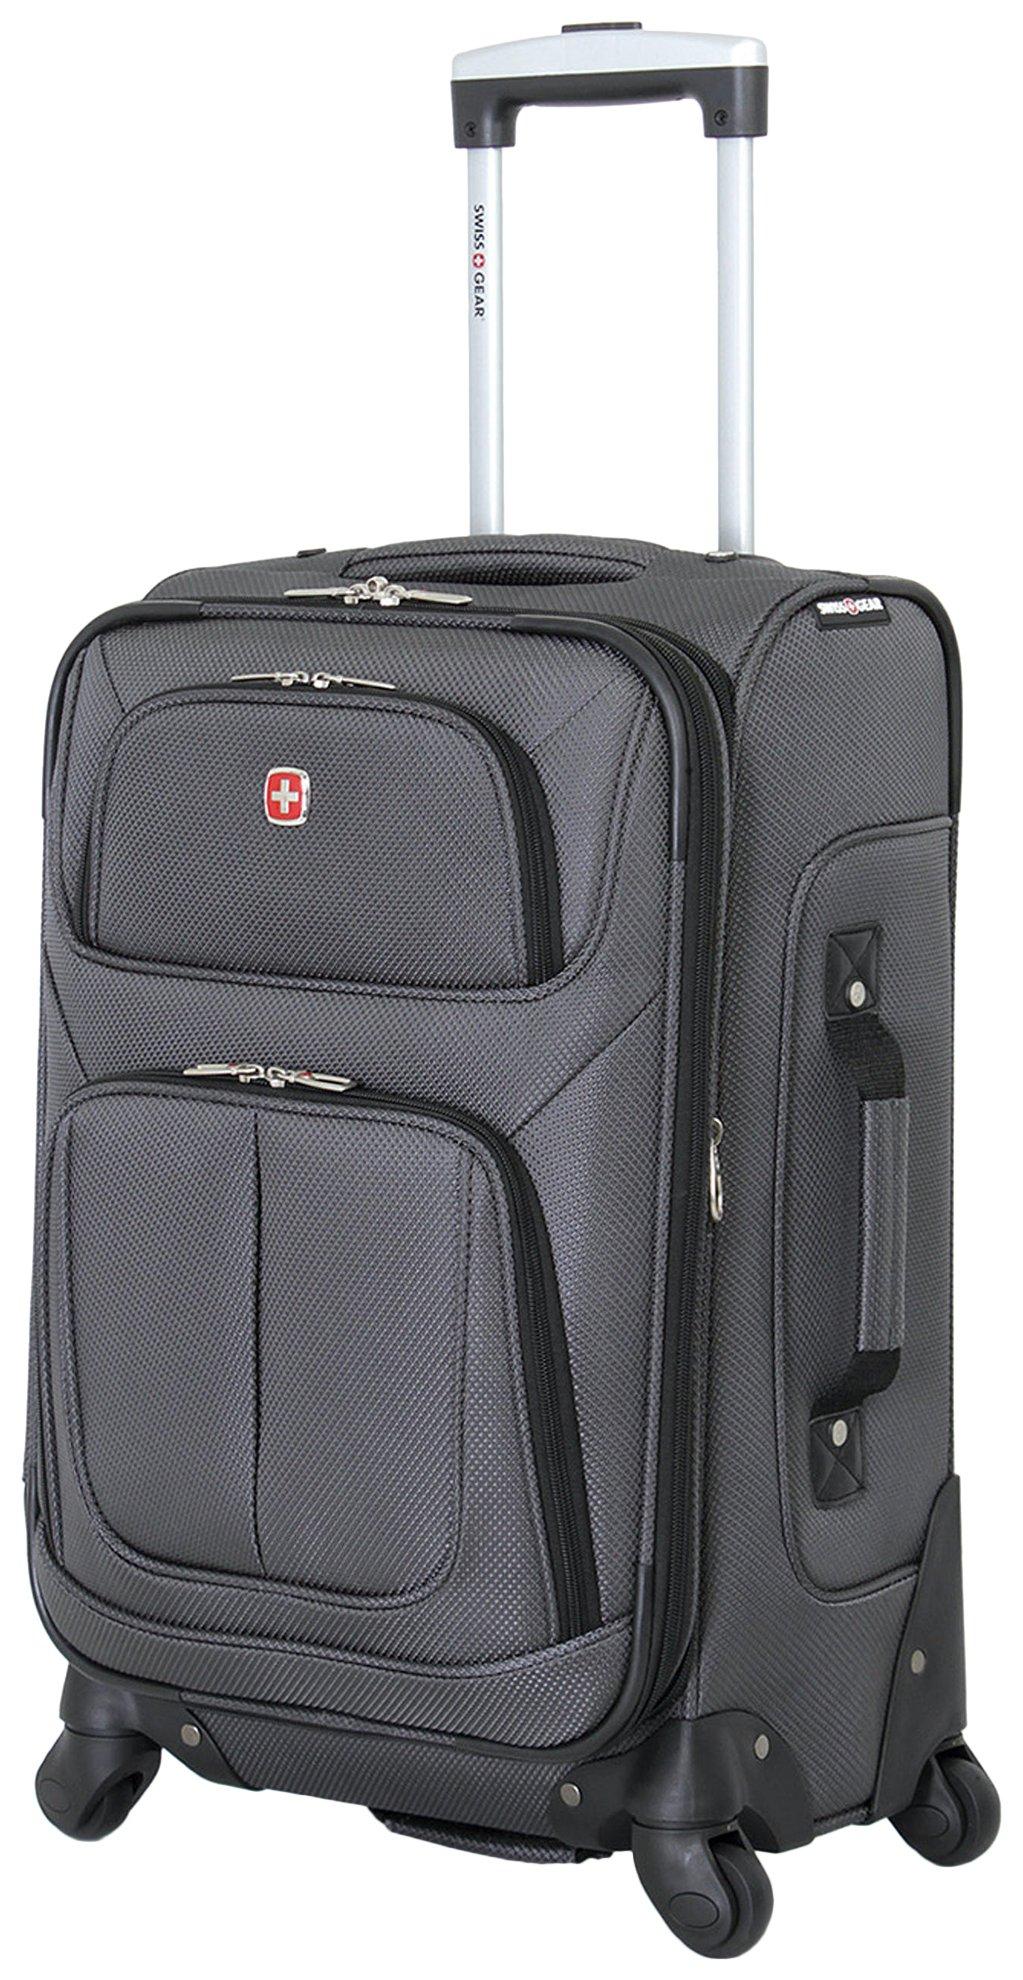 Swiss Gear 21 in. Sion Solid Expandable Spinner Luggage